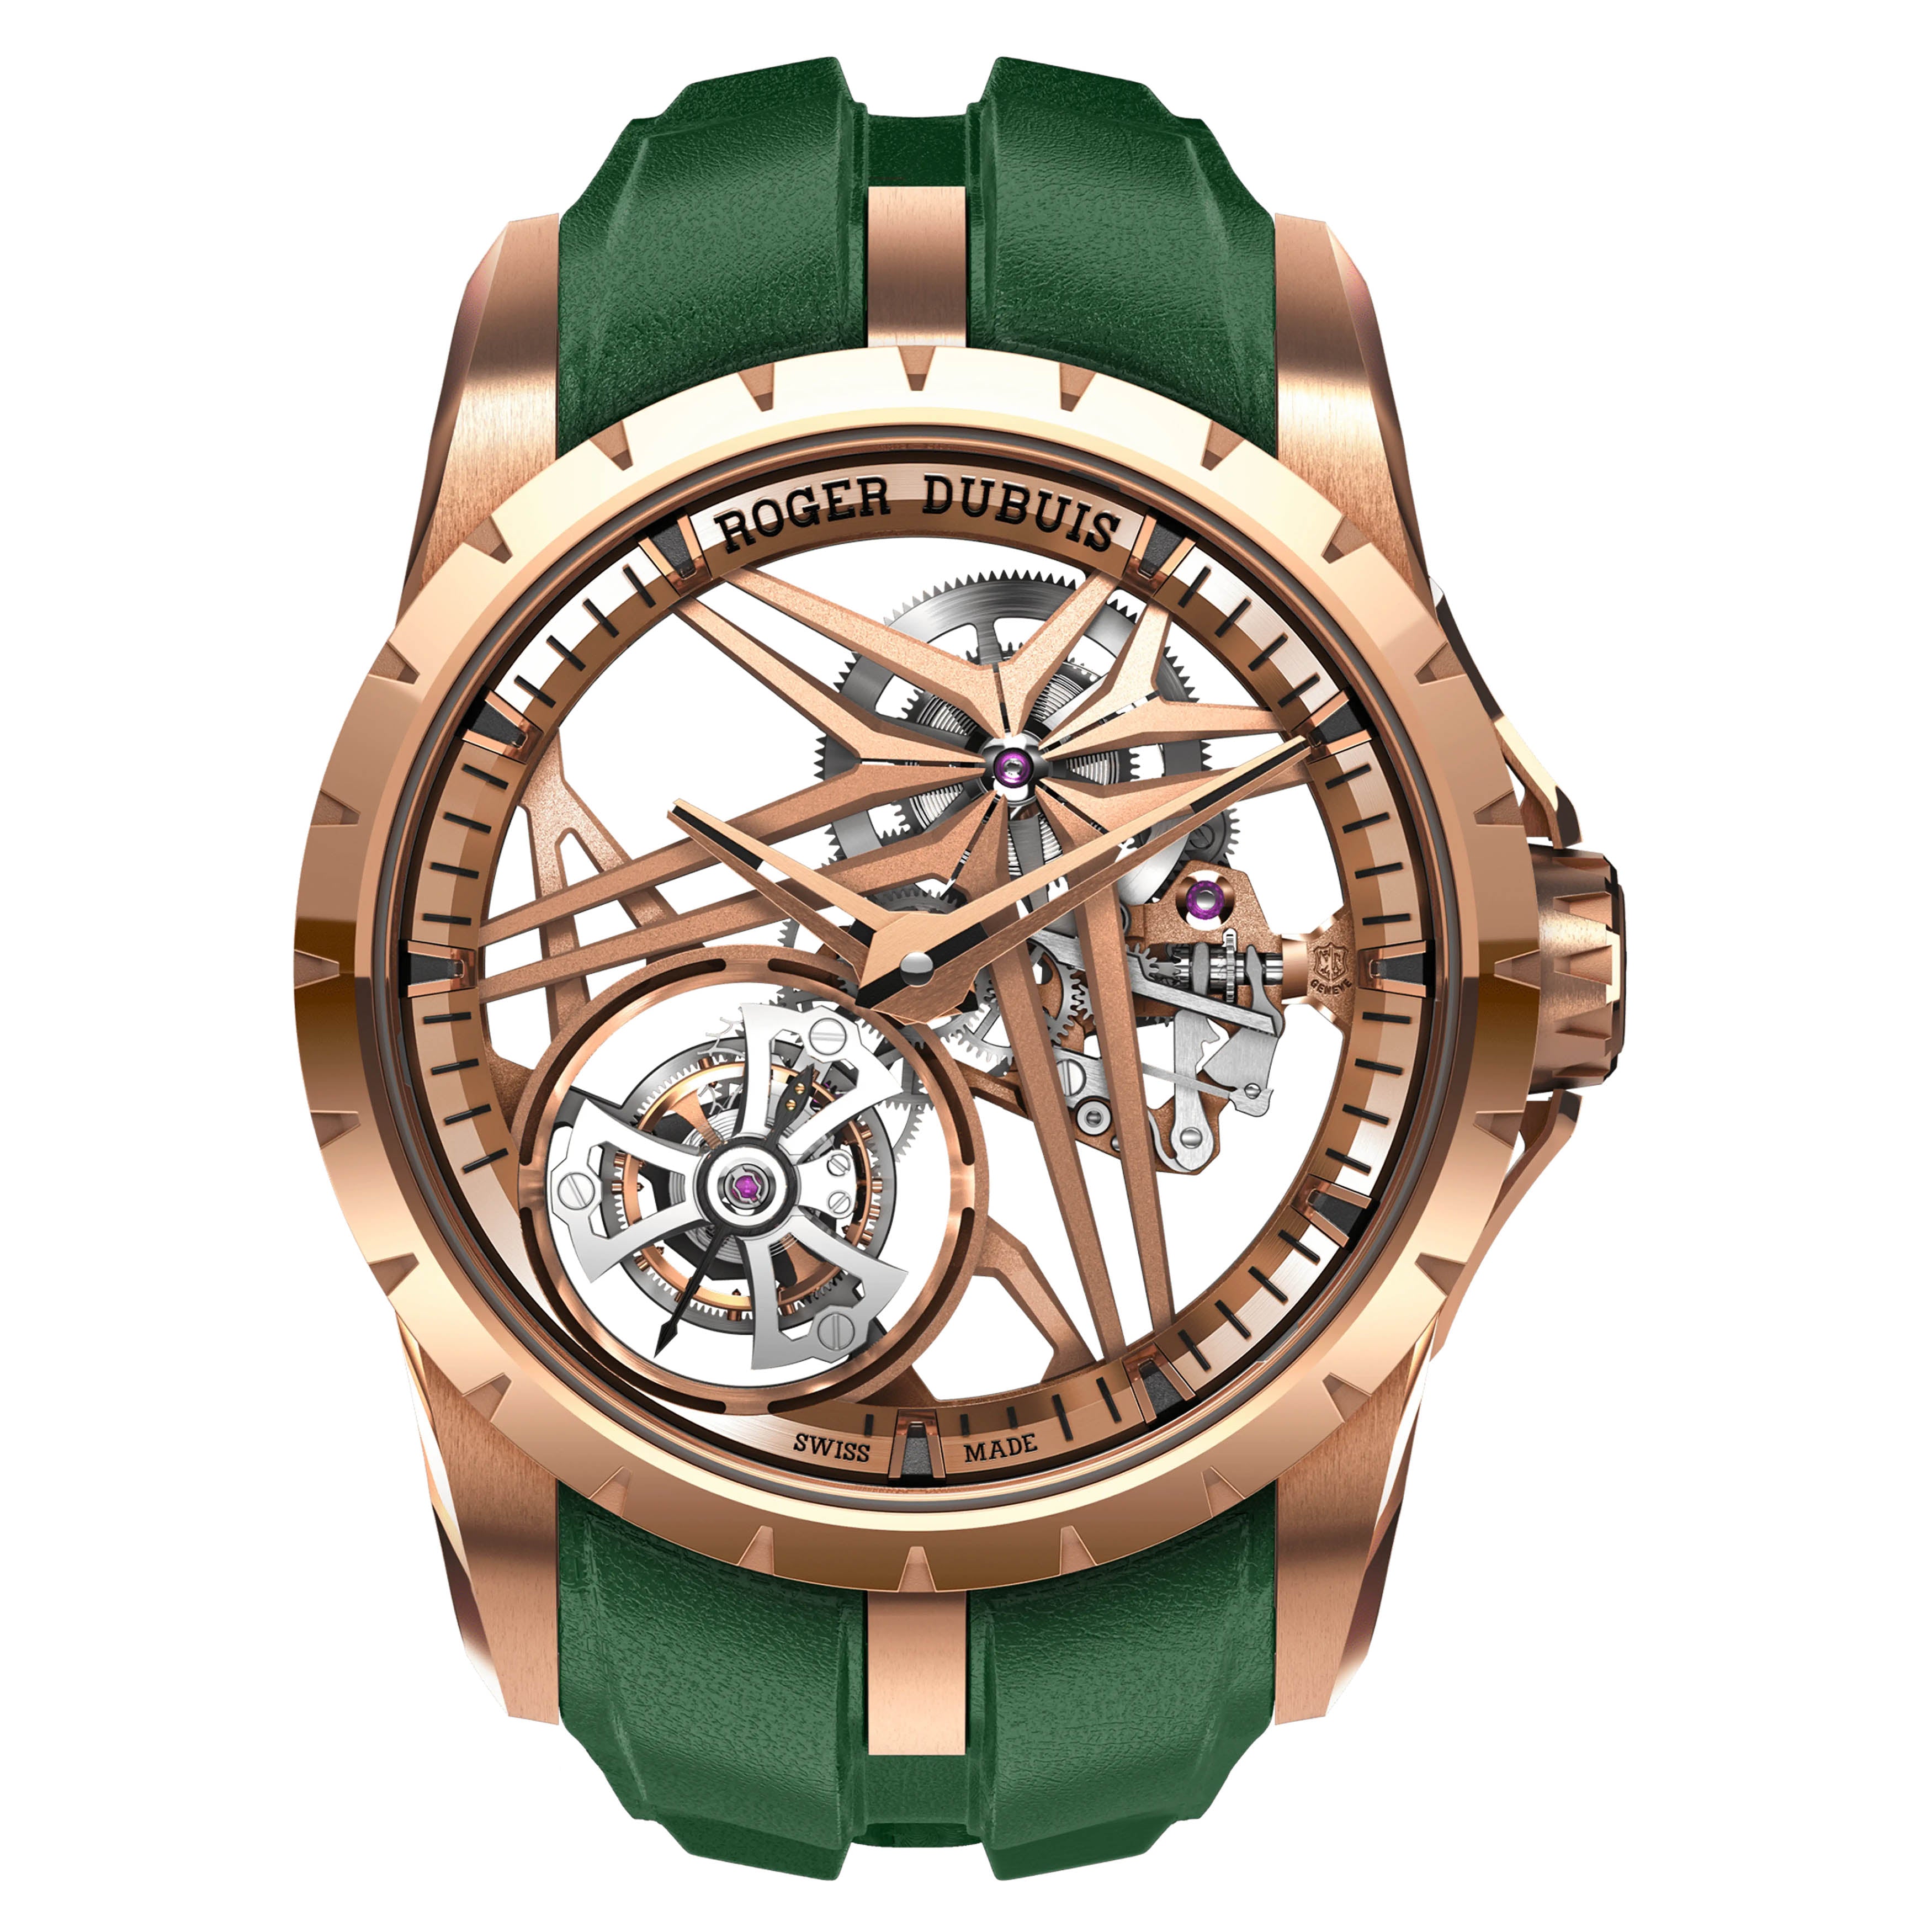 Roger Dubuis EXCALIBUR HURACAN PERFORMANTE | Watches News